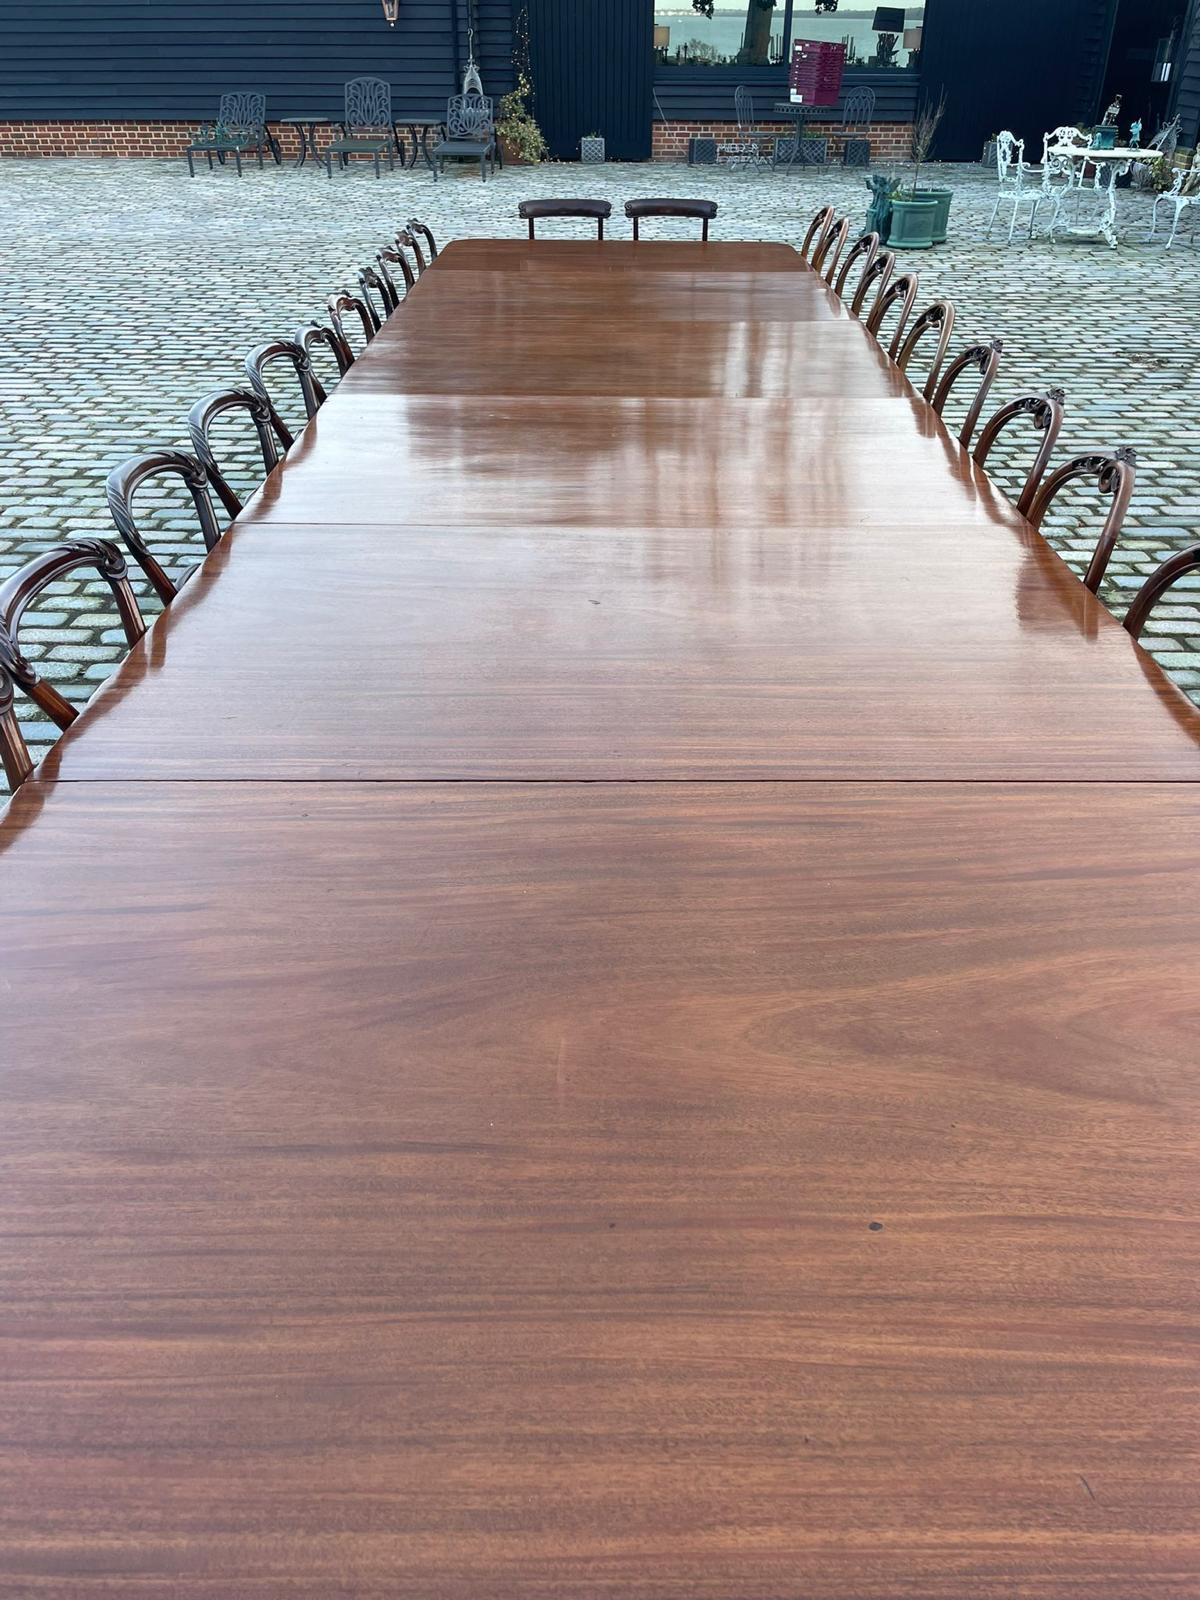 Rare 28 seater 6 pilar Antique Quality Mahogany Dining Table 72 x 161 x 609 cm For Sale 10